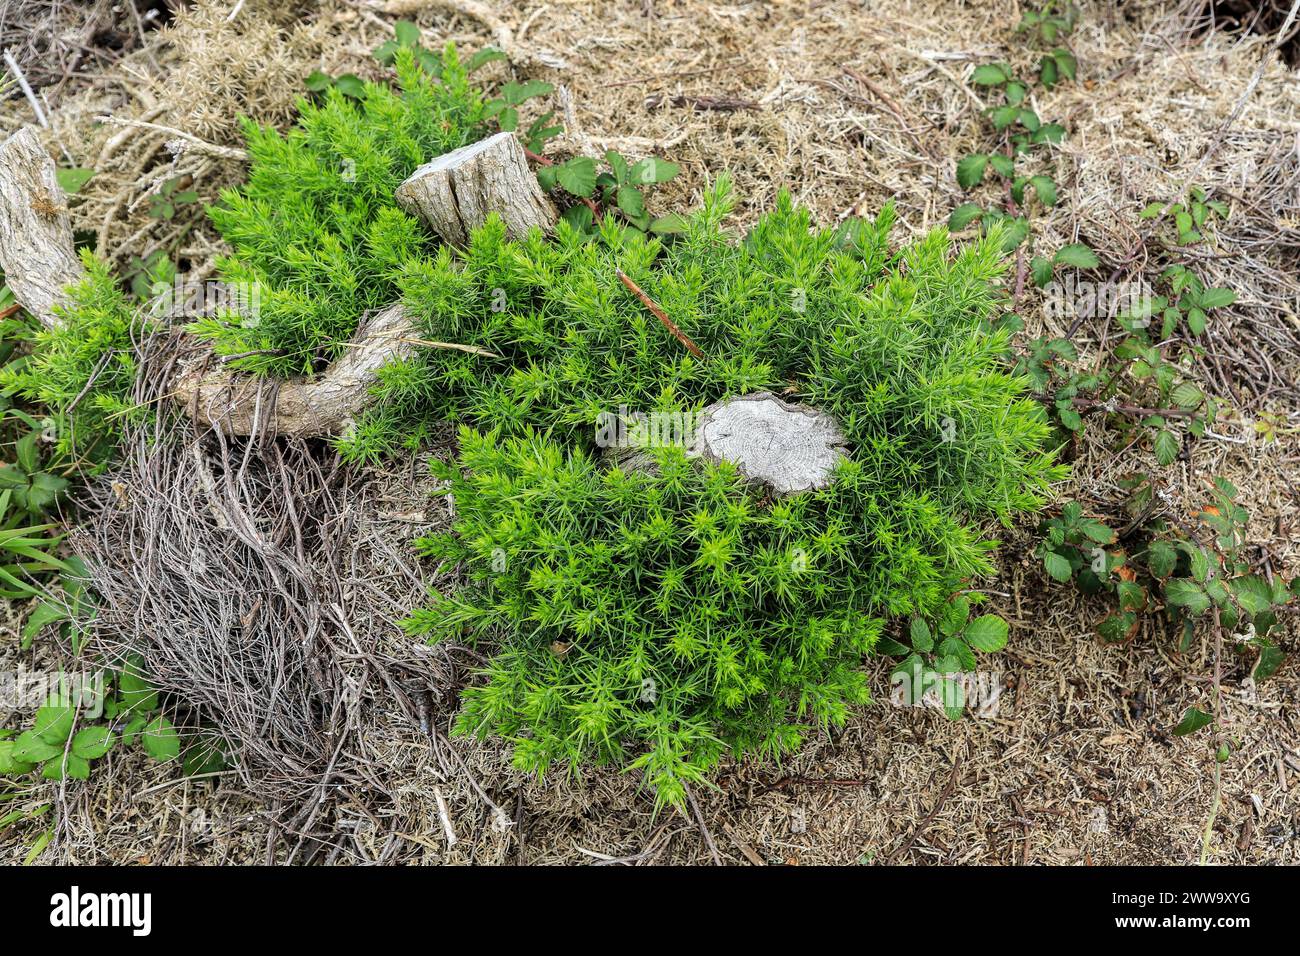 The regeneration of a Juniper (Juniperus chinensis) tree after it has been severely cut back, England, UK Stock Photo